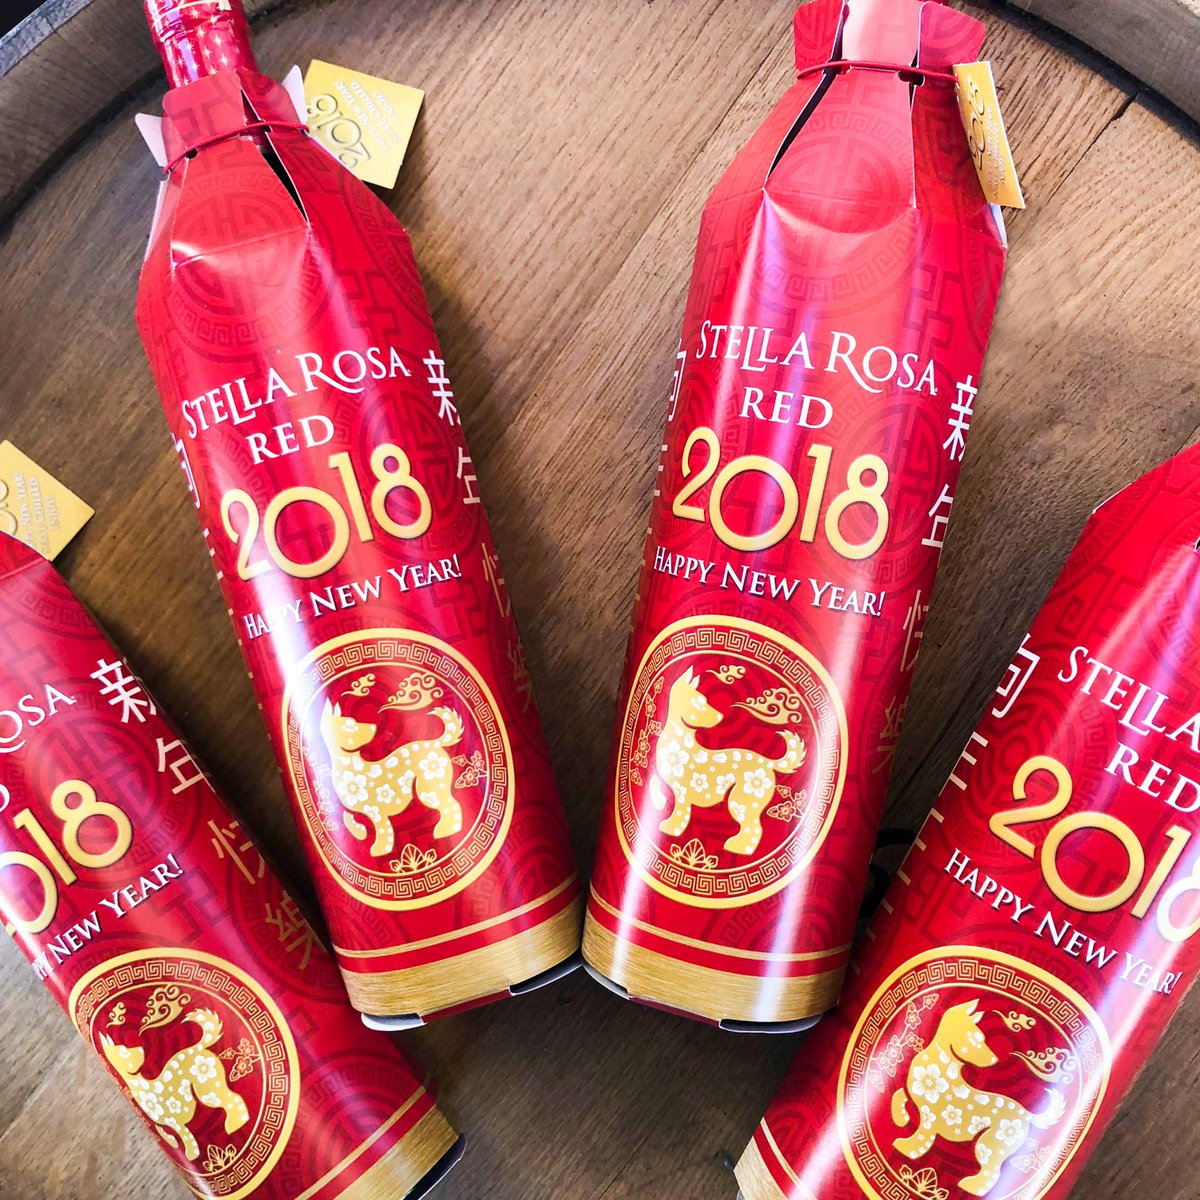 Happy Lunar New Year from #SanAntonioWineryOntario. We’re #stellabrating the #yearofthedog with special sleeves for your #wine. Get them at our #winery and add some custom artwork to your evening. #LunarNewYear